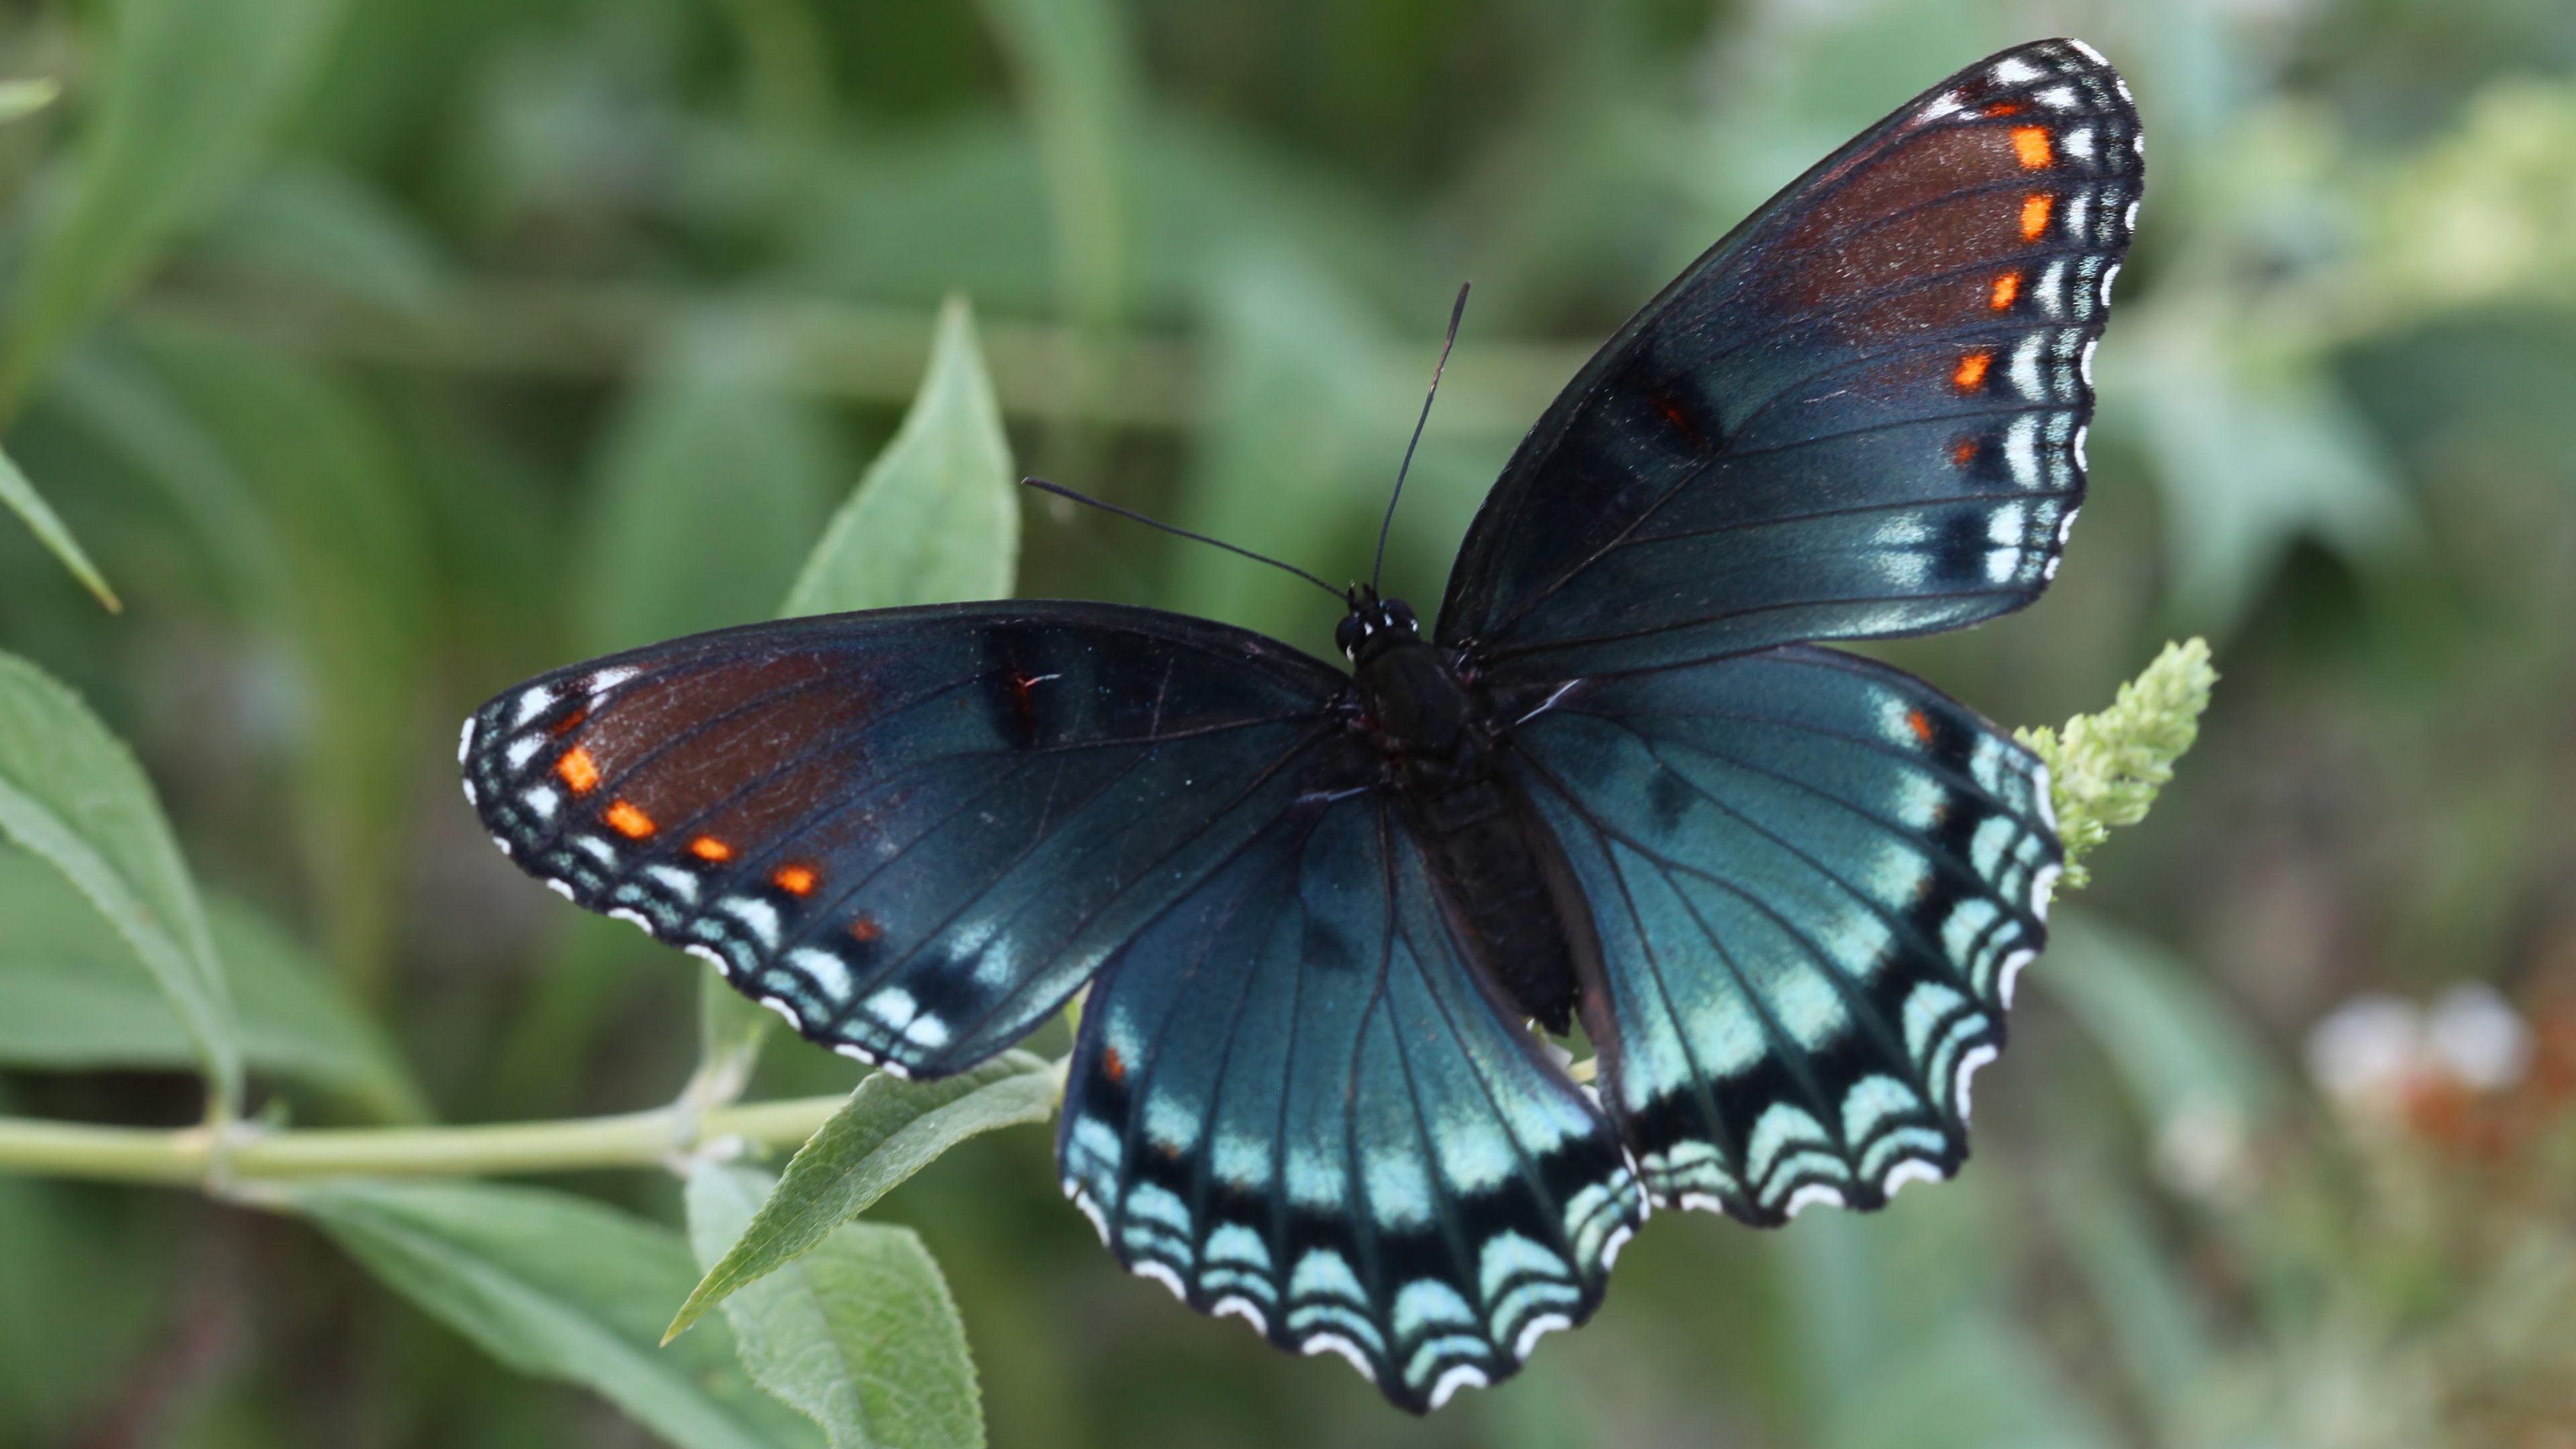 Red Spotted Purple Butterfly Wallpaper - iPhone, Android ...